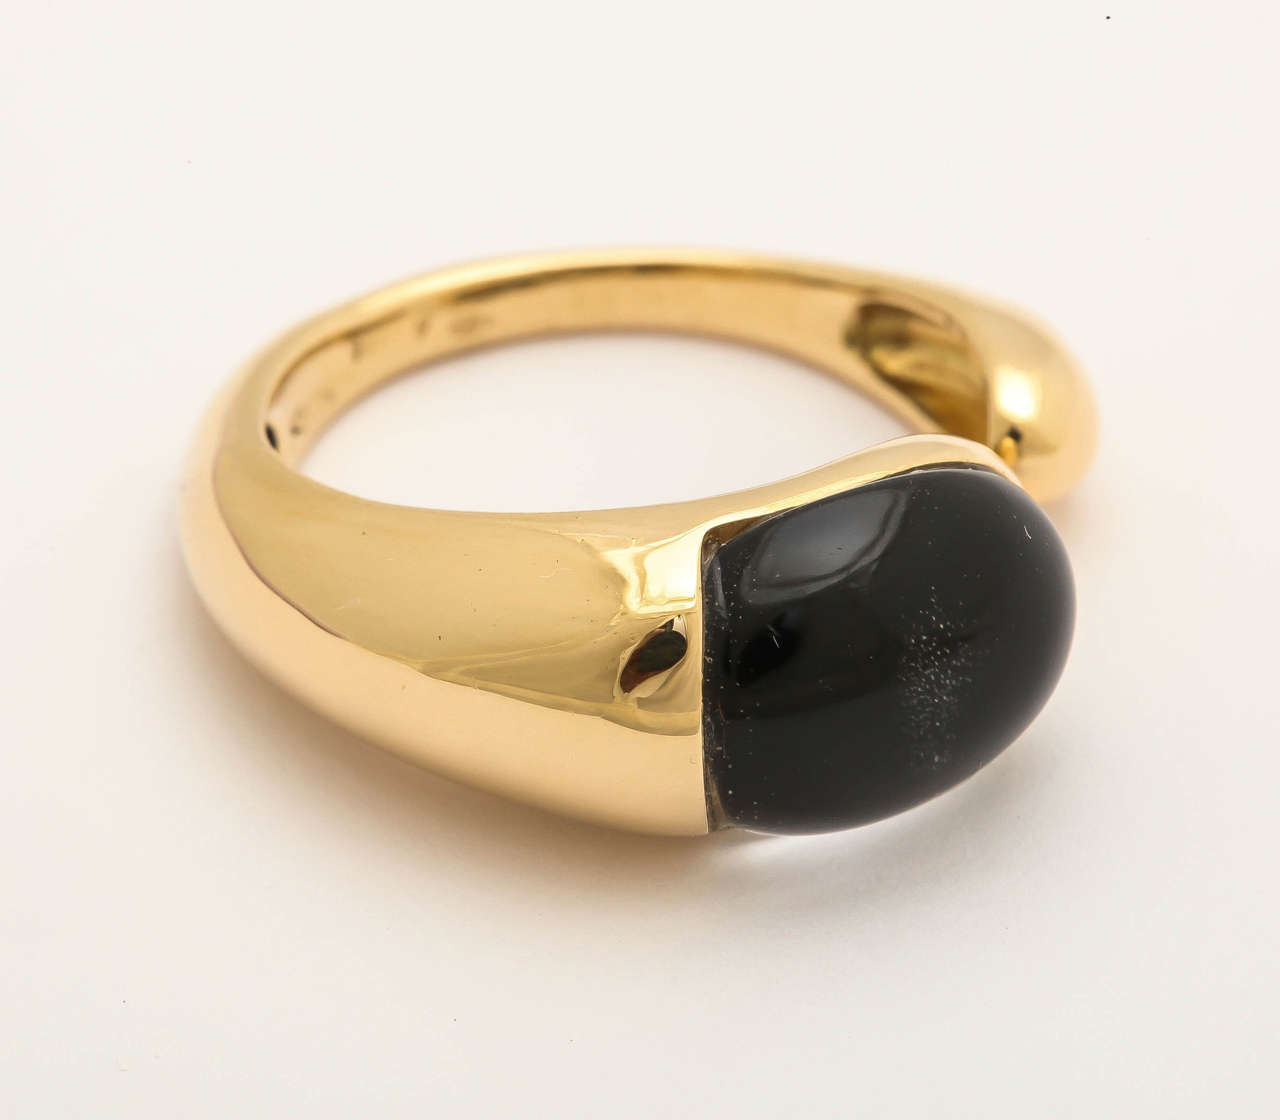 18Kt yellow gold ring with black onyx stone.